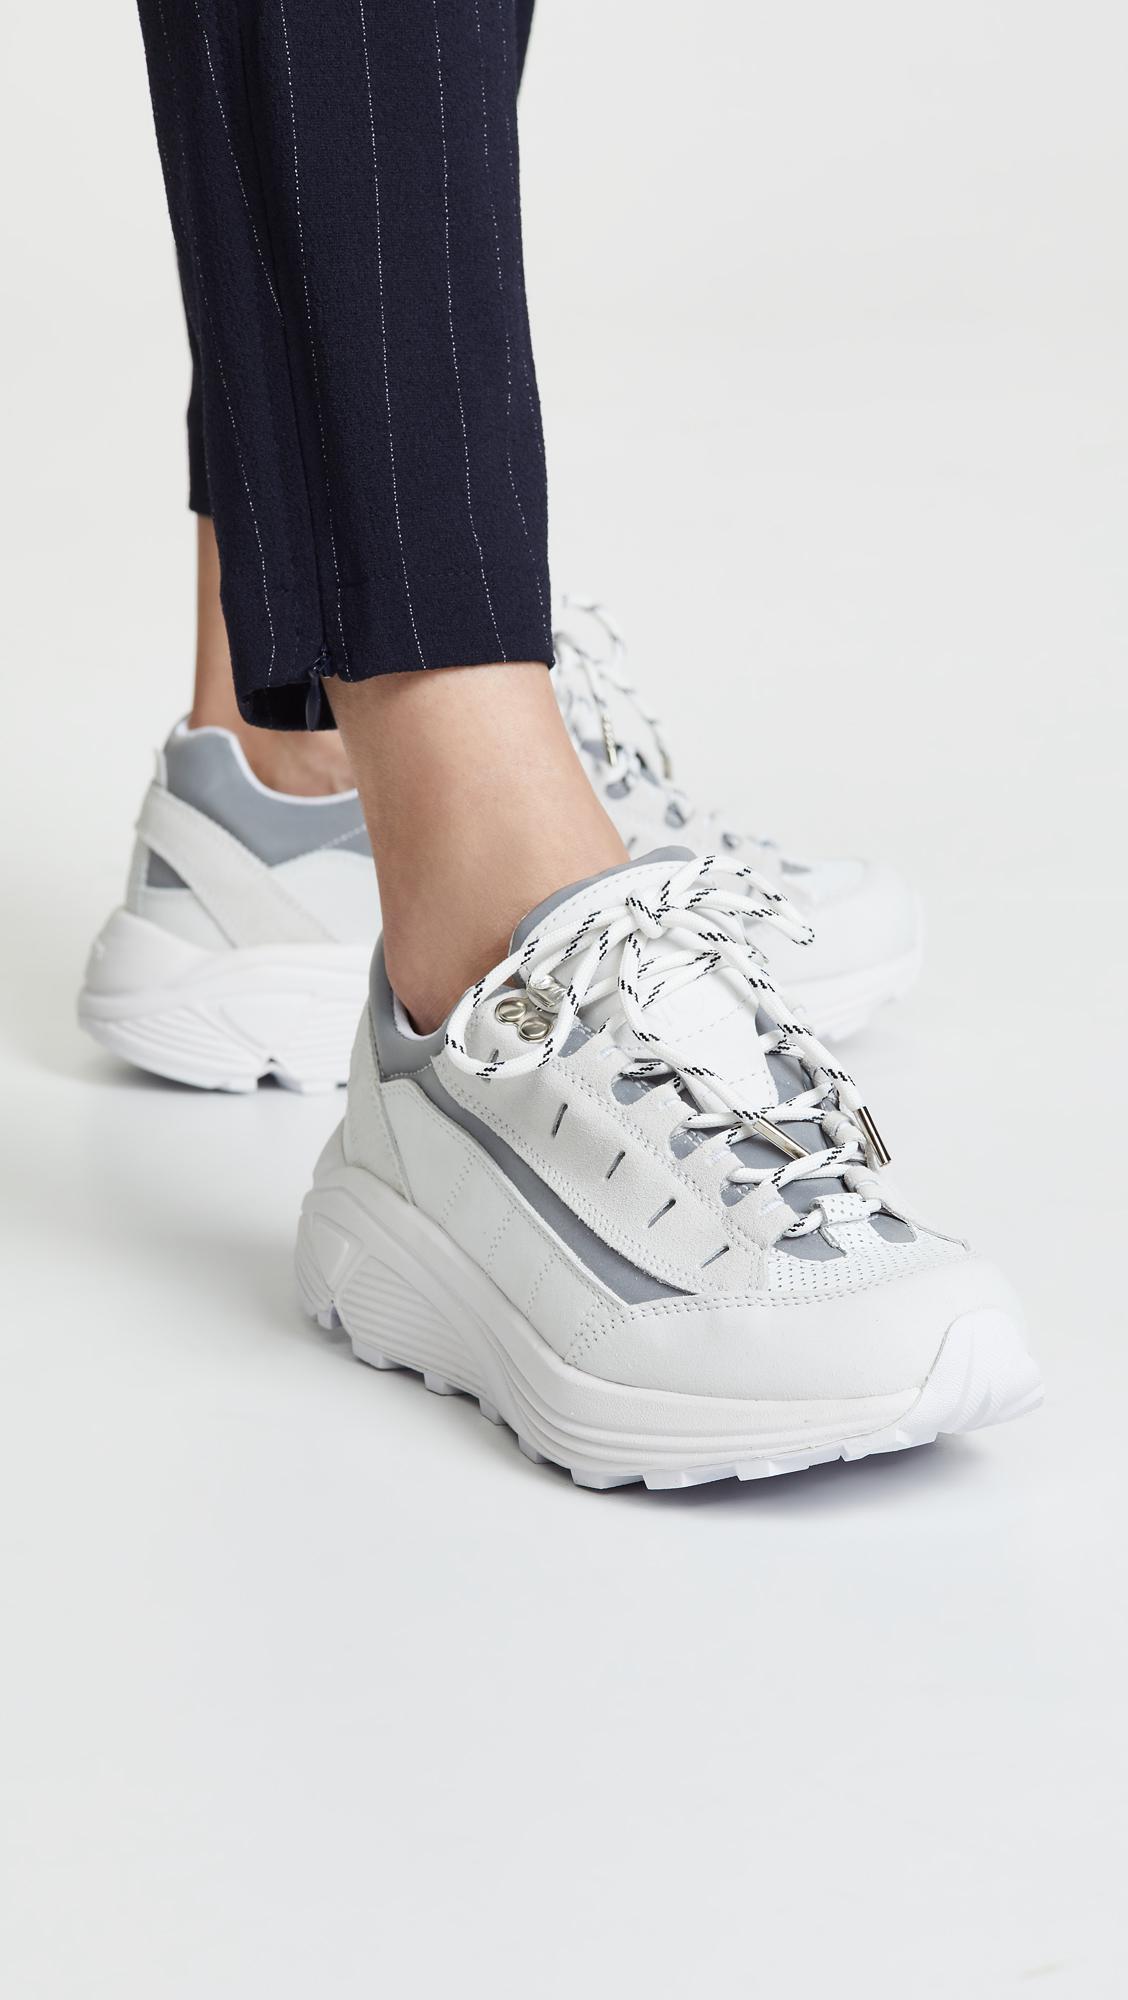 Ganni Synthetic Iris Suede And Leather Sneakers in Bright White (White) -  Lyst